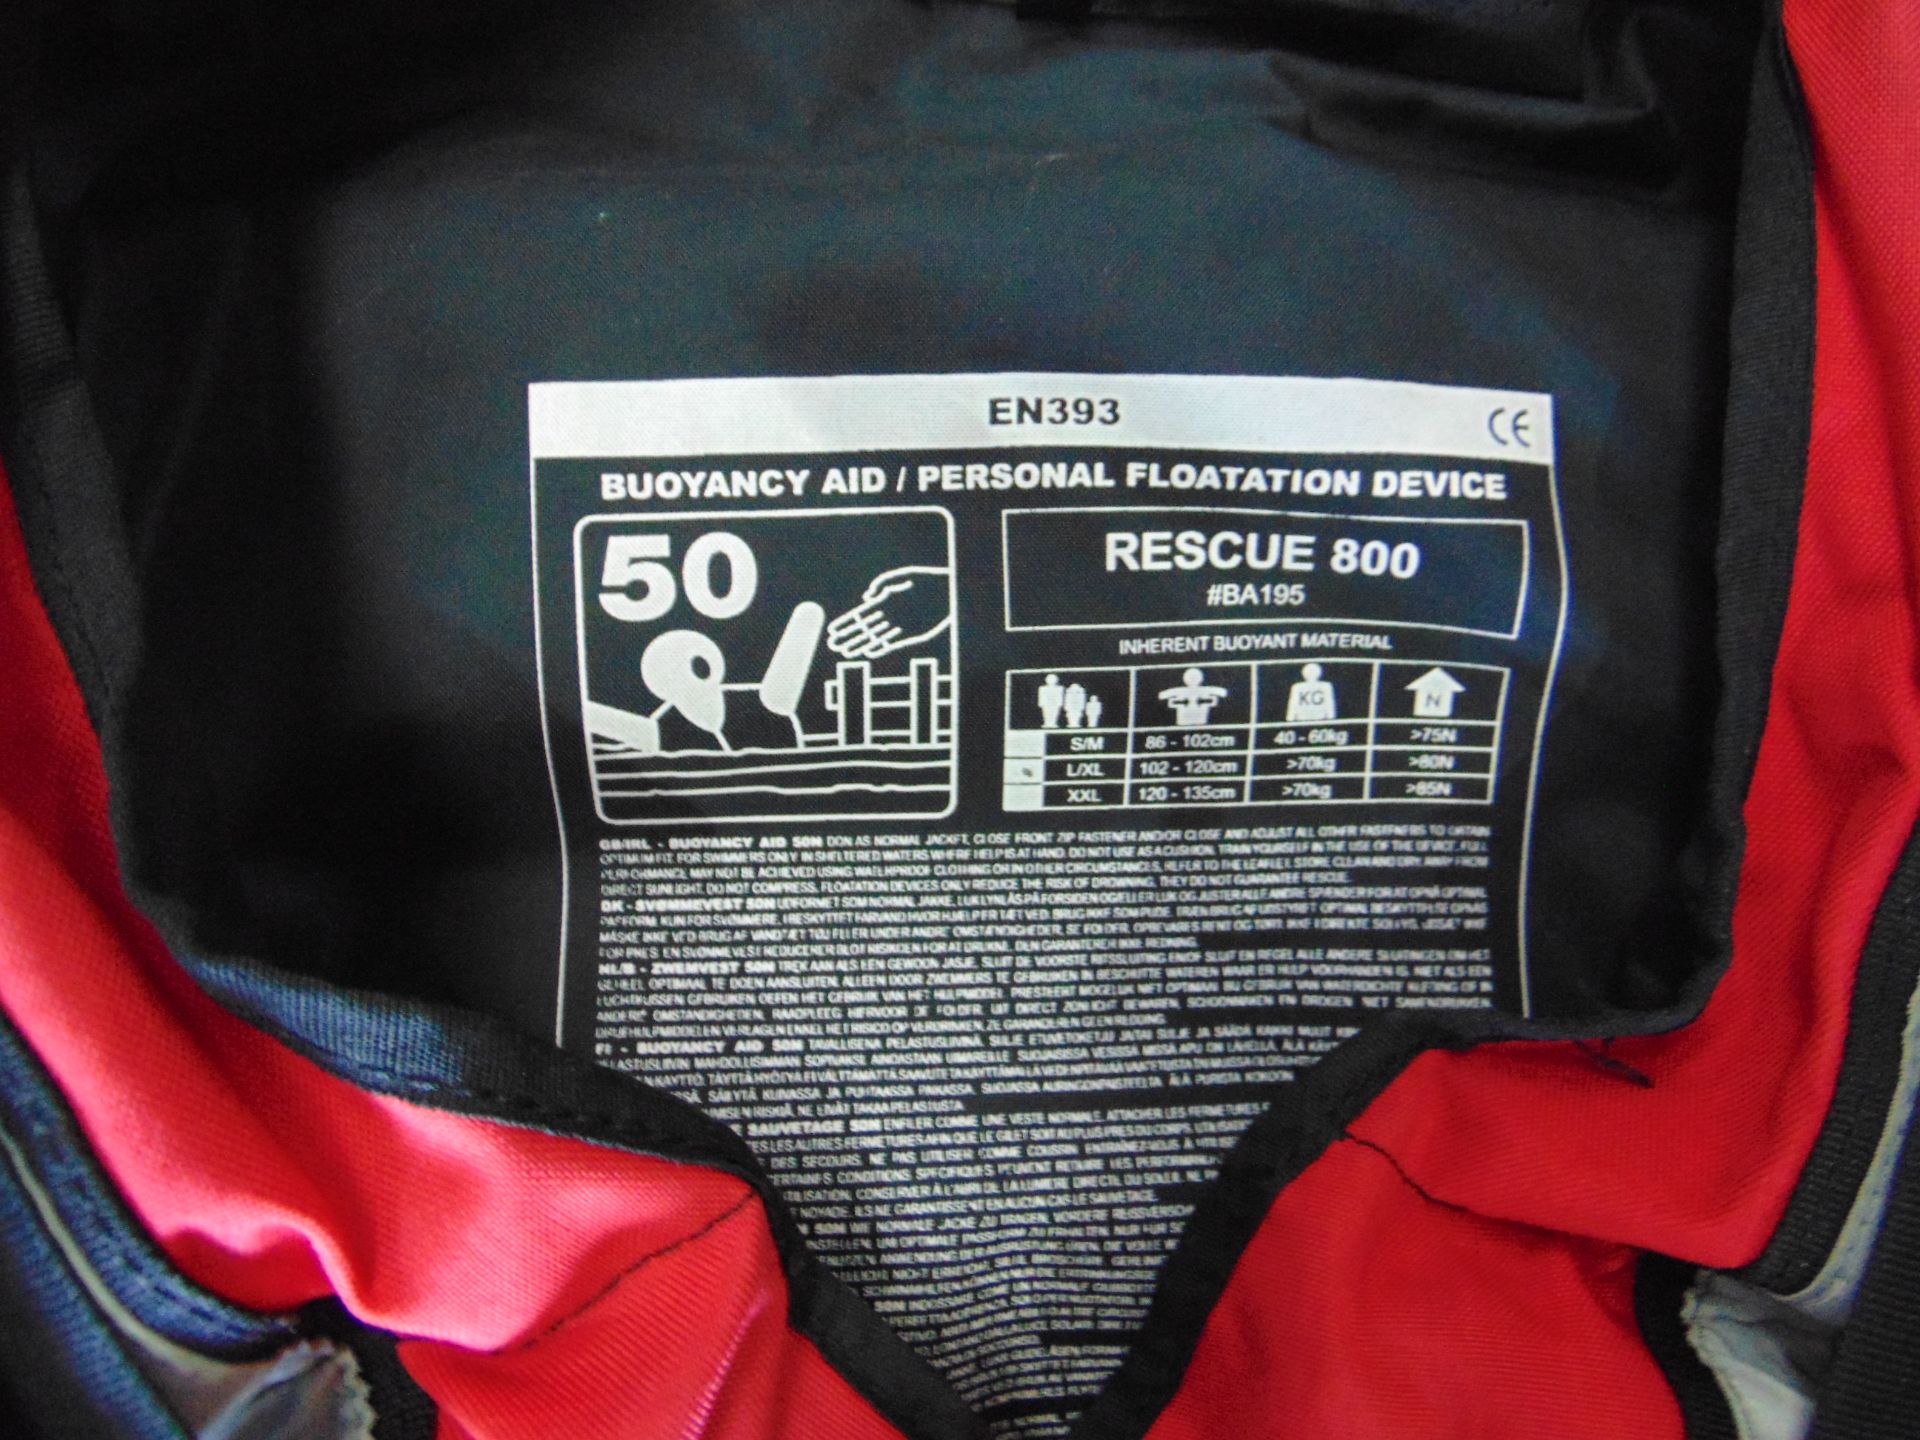 Palm Professional Rescue 800 Buoyancy Aid - PFD Personal Floatation Device Size L/XL - Image 3 of 4